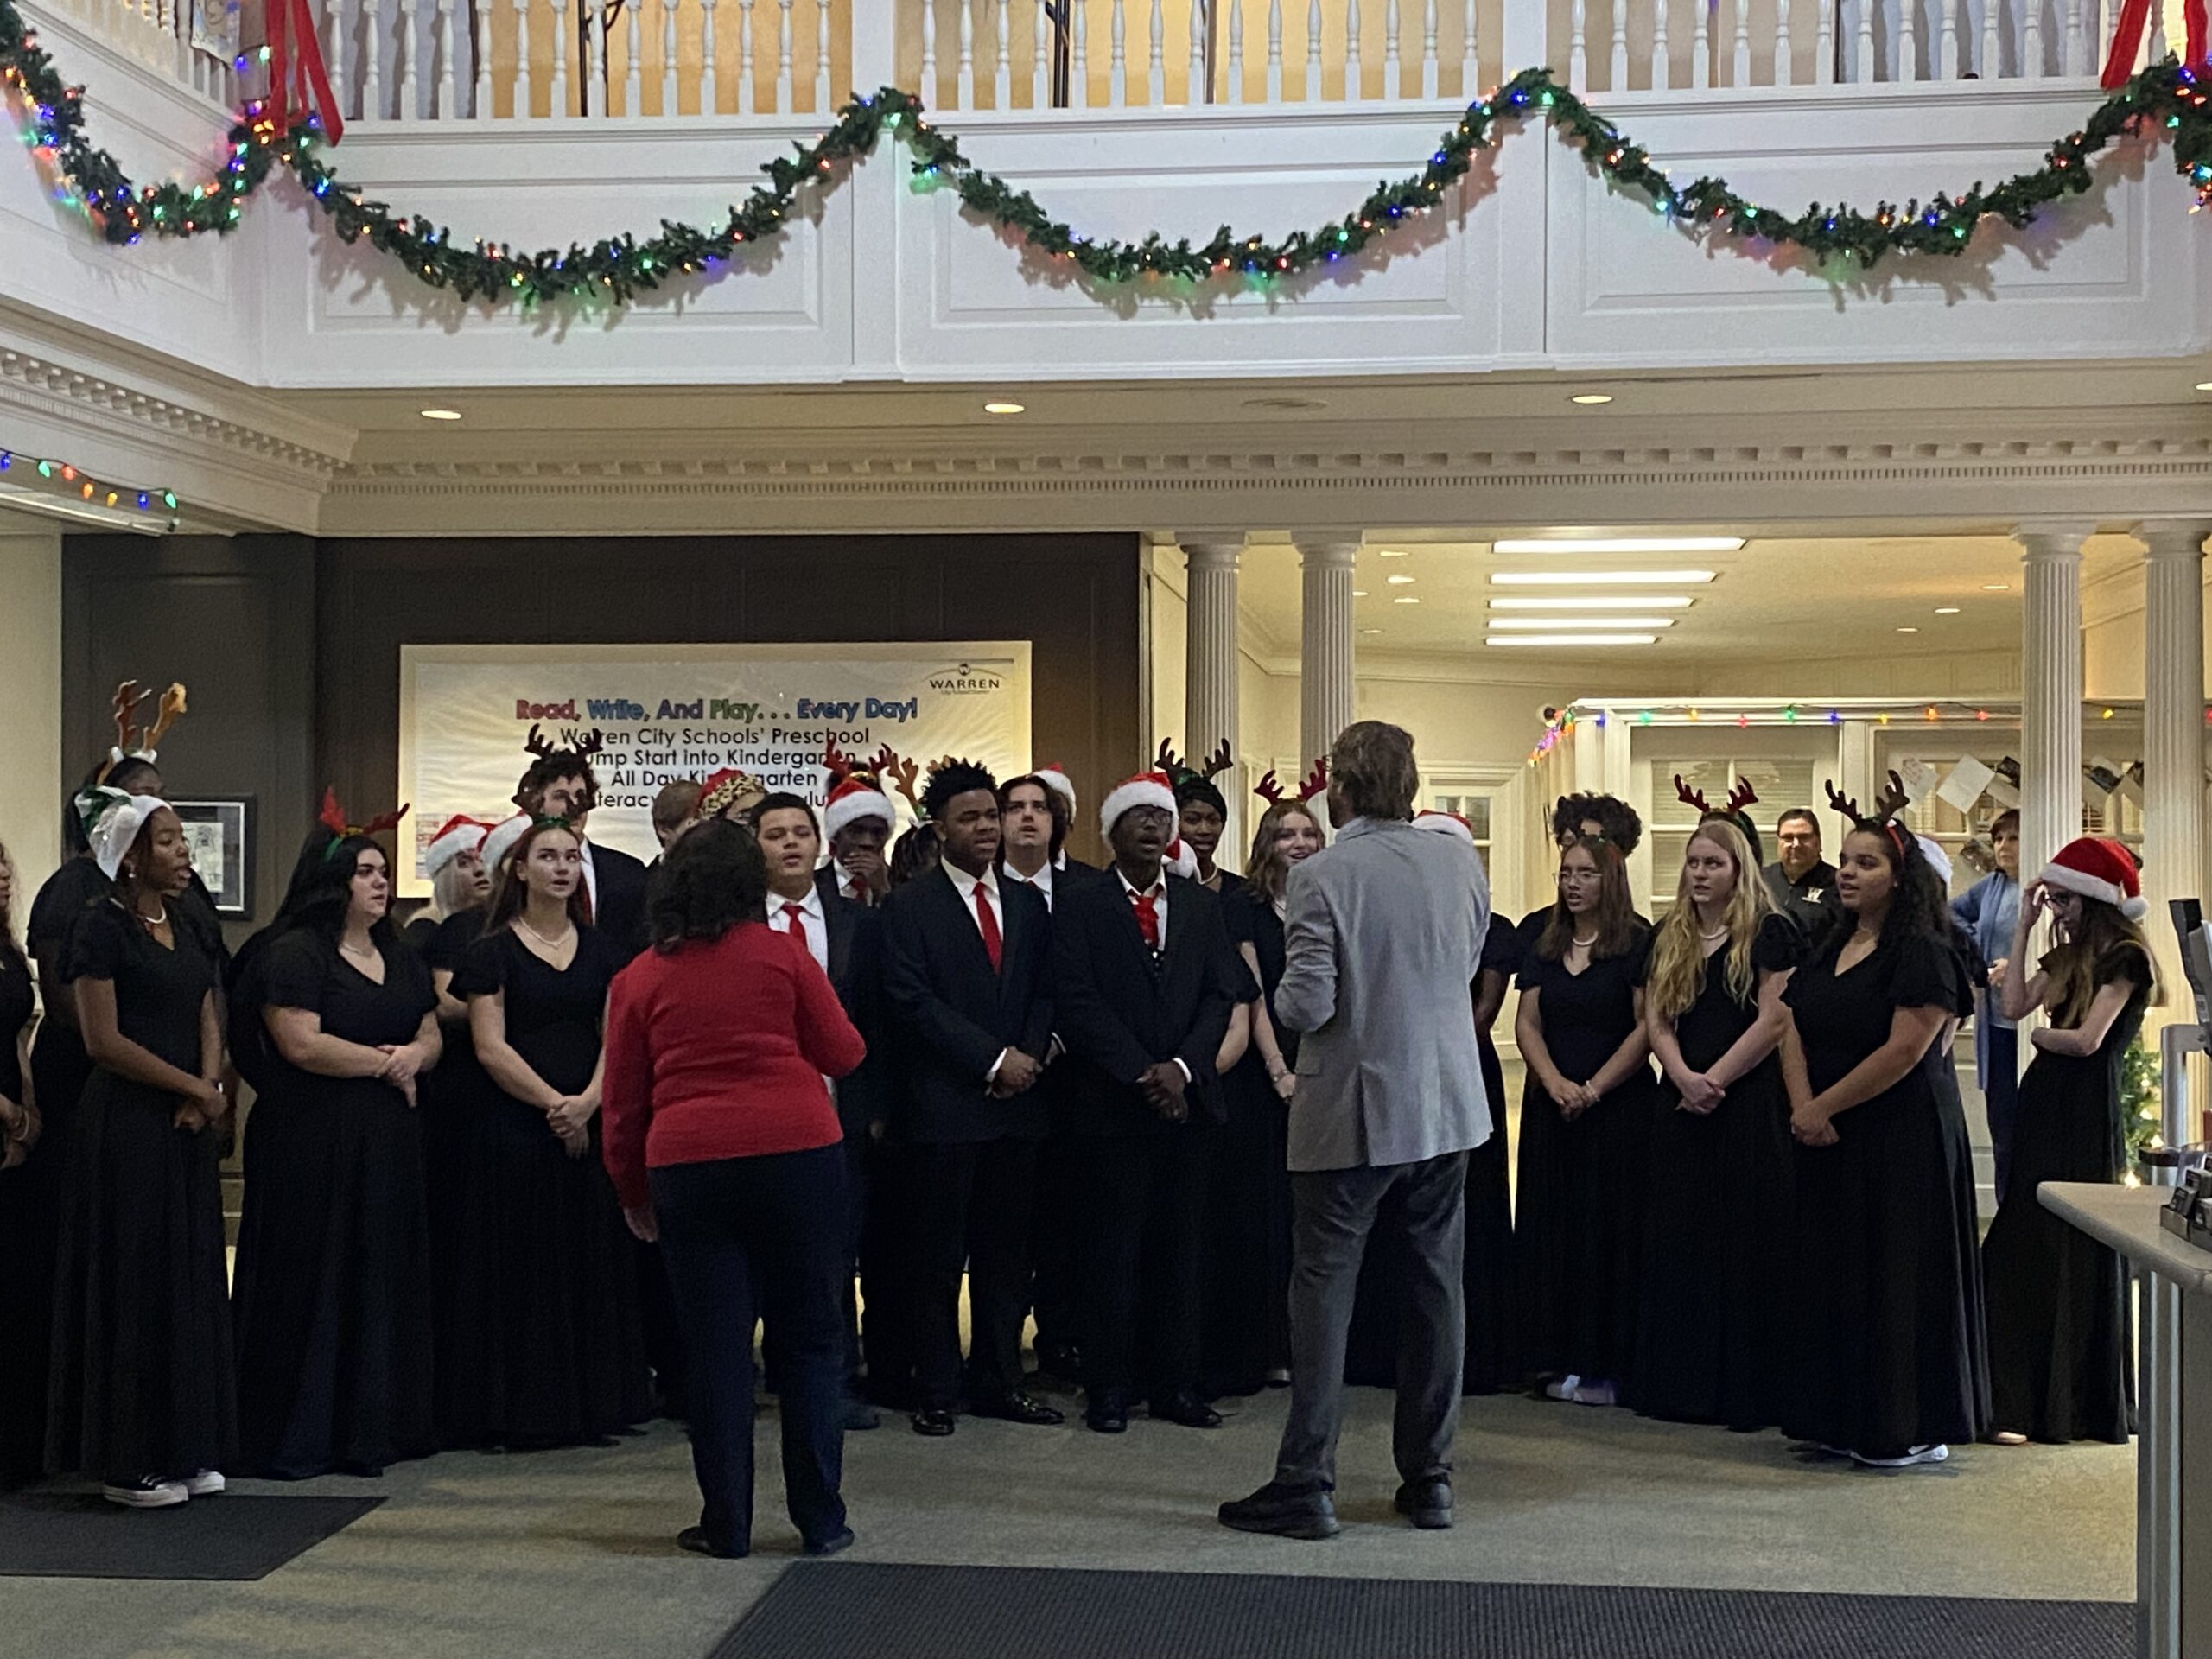 WGH Madrigal Singers Ring In The Holiday Season